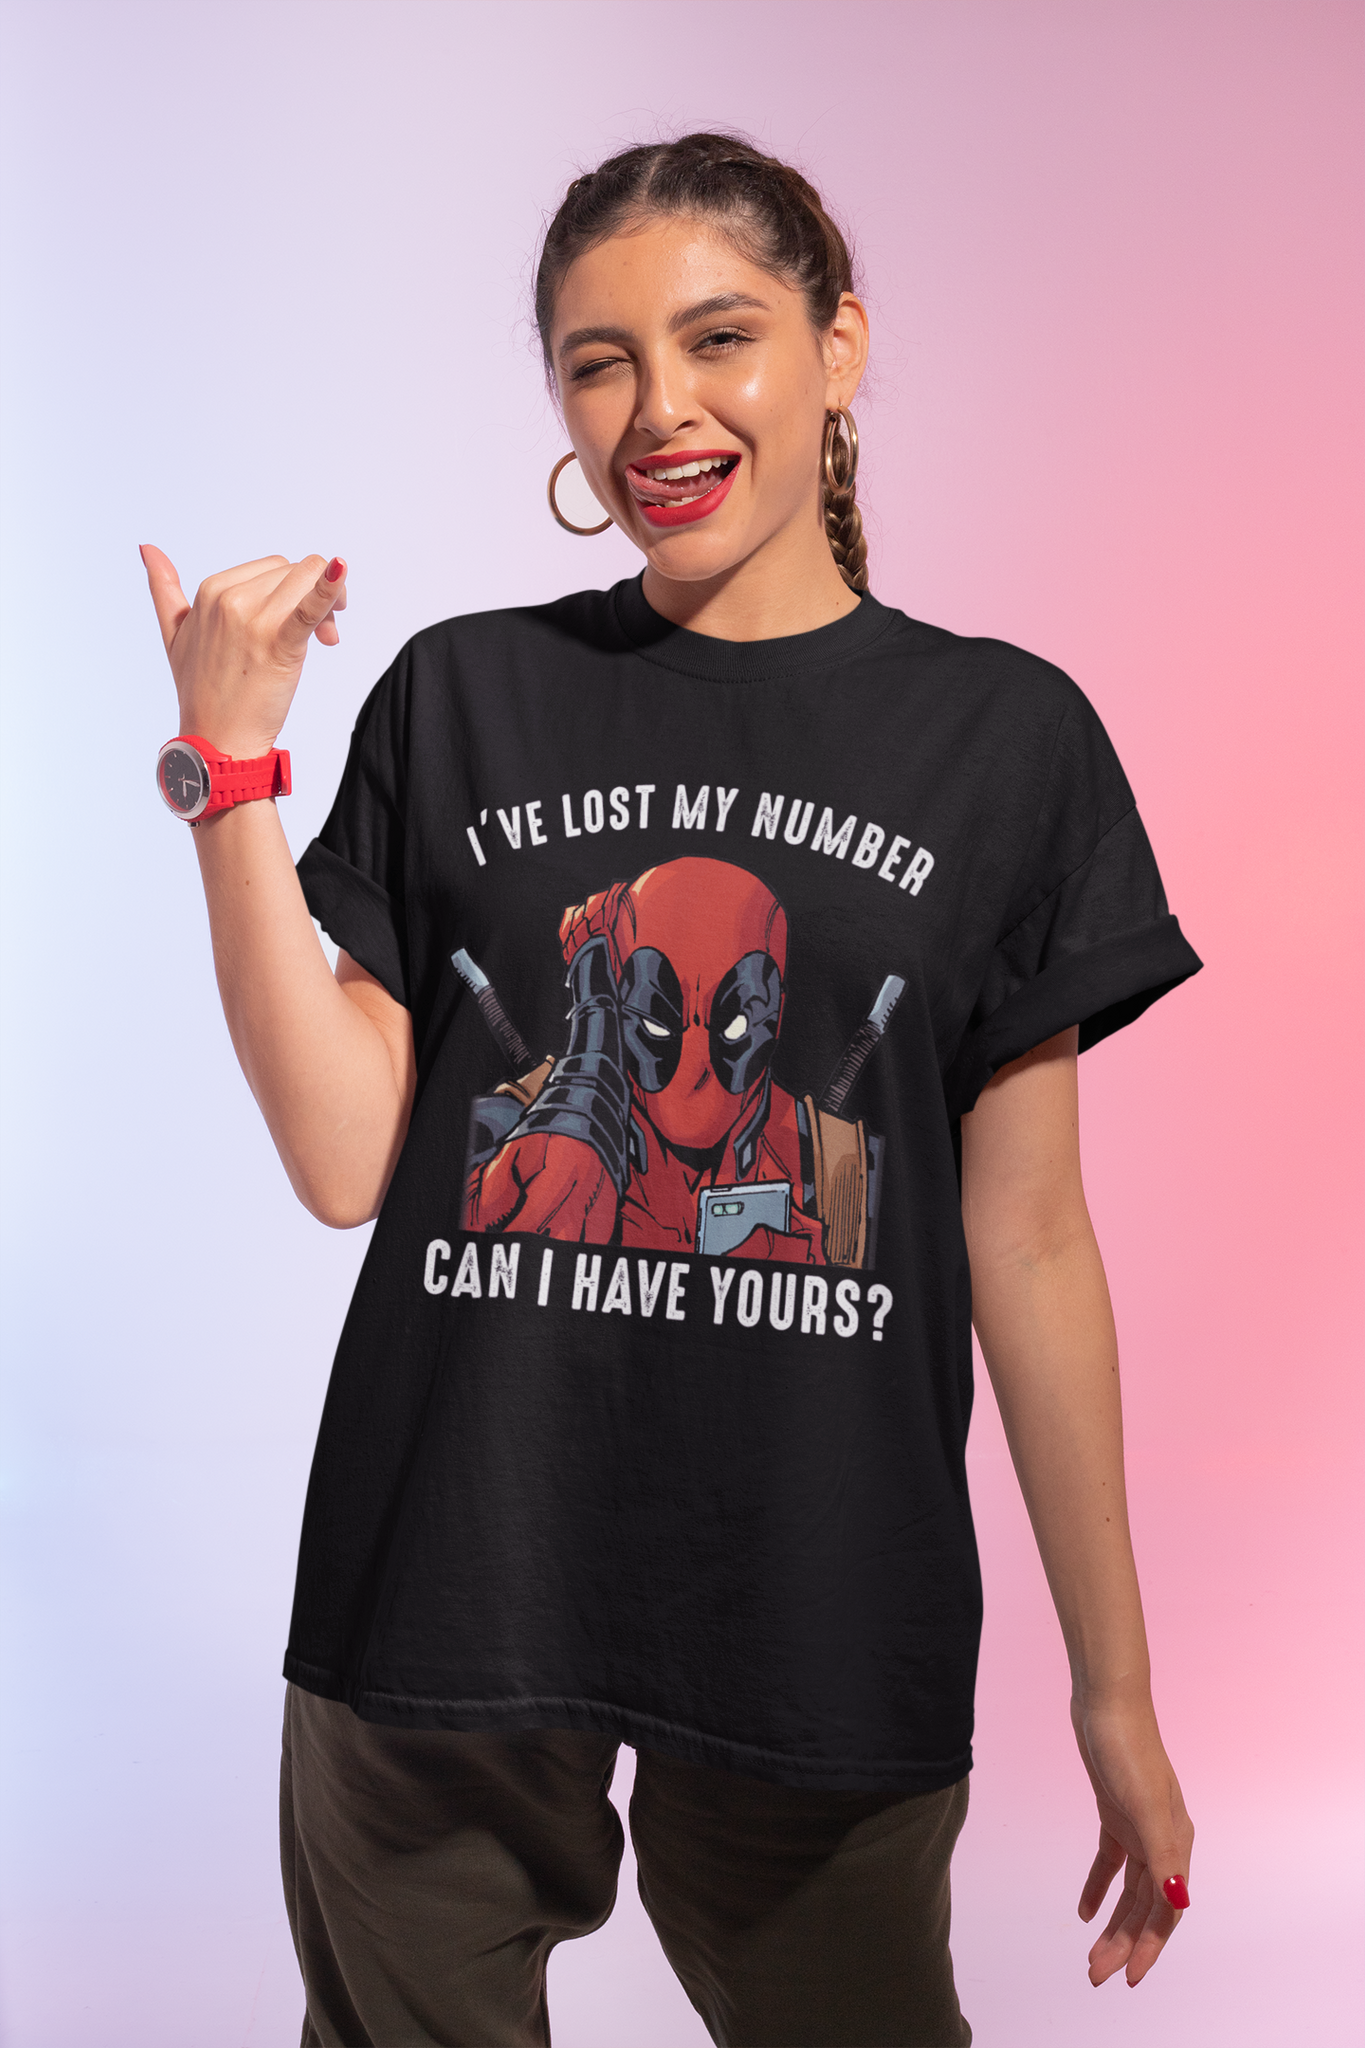 Deadpool T Shirt, Ive Lost My Number Can I Have Yours Tshirt, Superhero Deadpool T Shirt